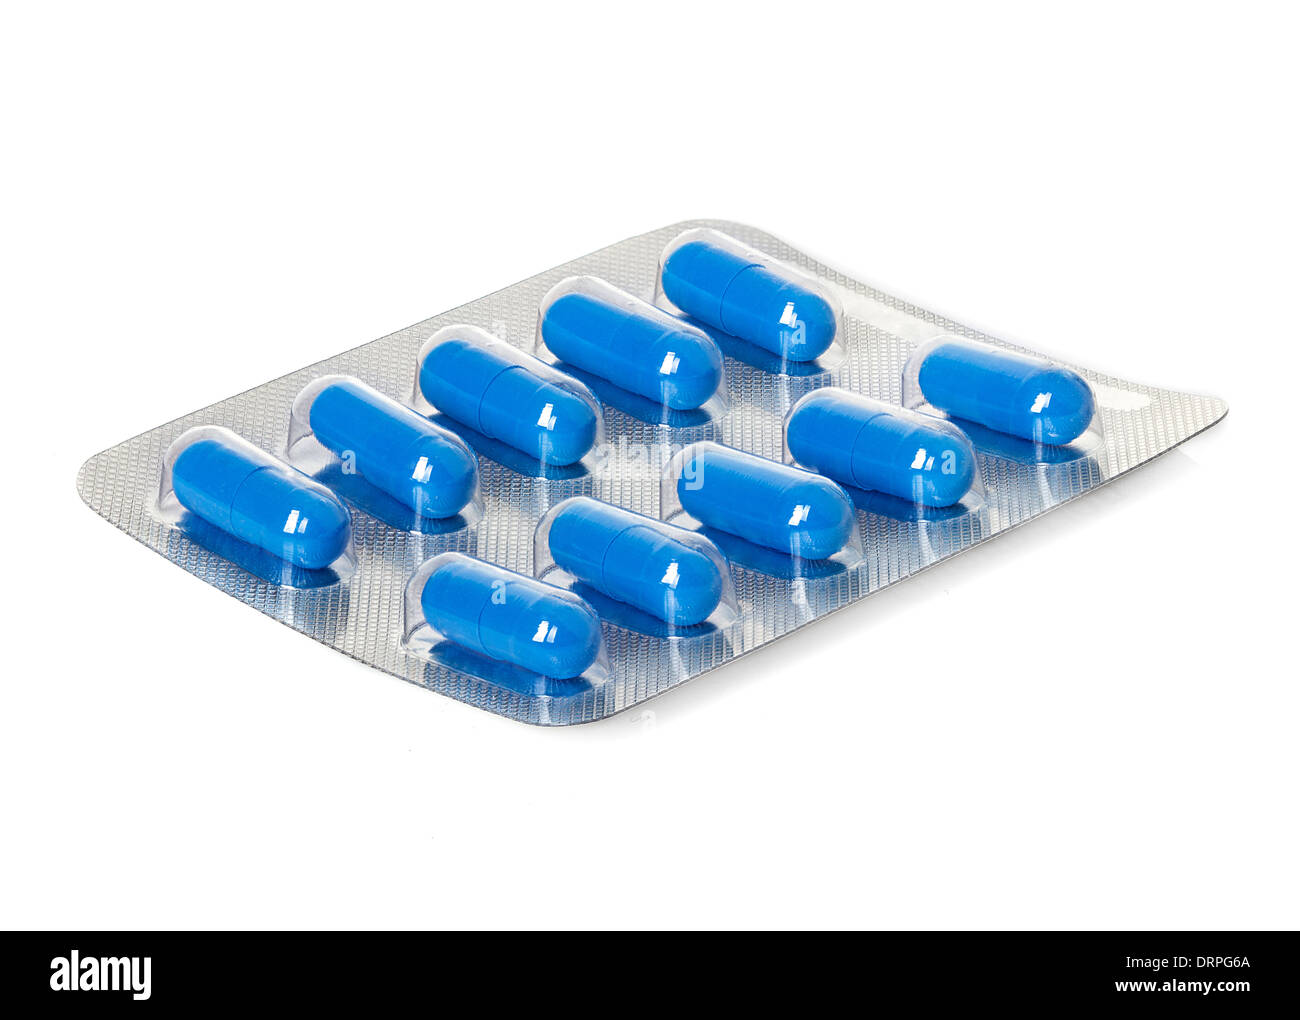 Blue medication capsules, pils in blister pack close-up Stock Photo